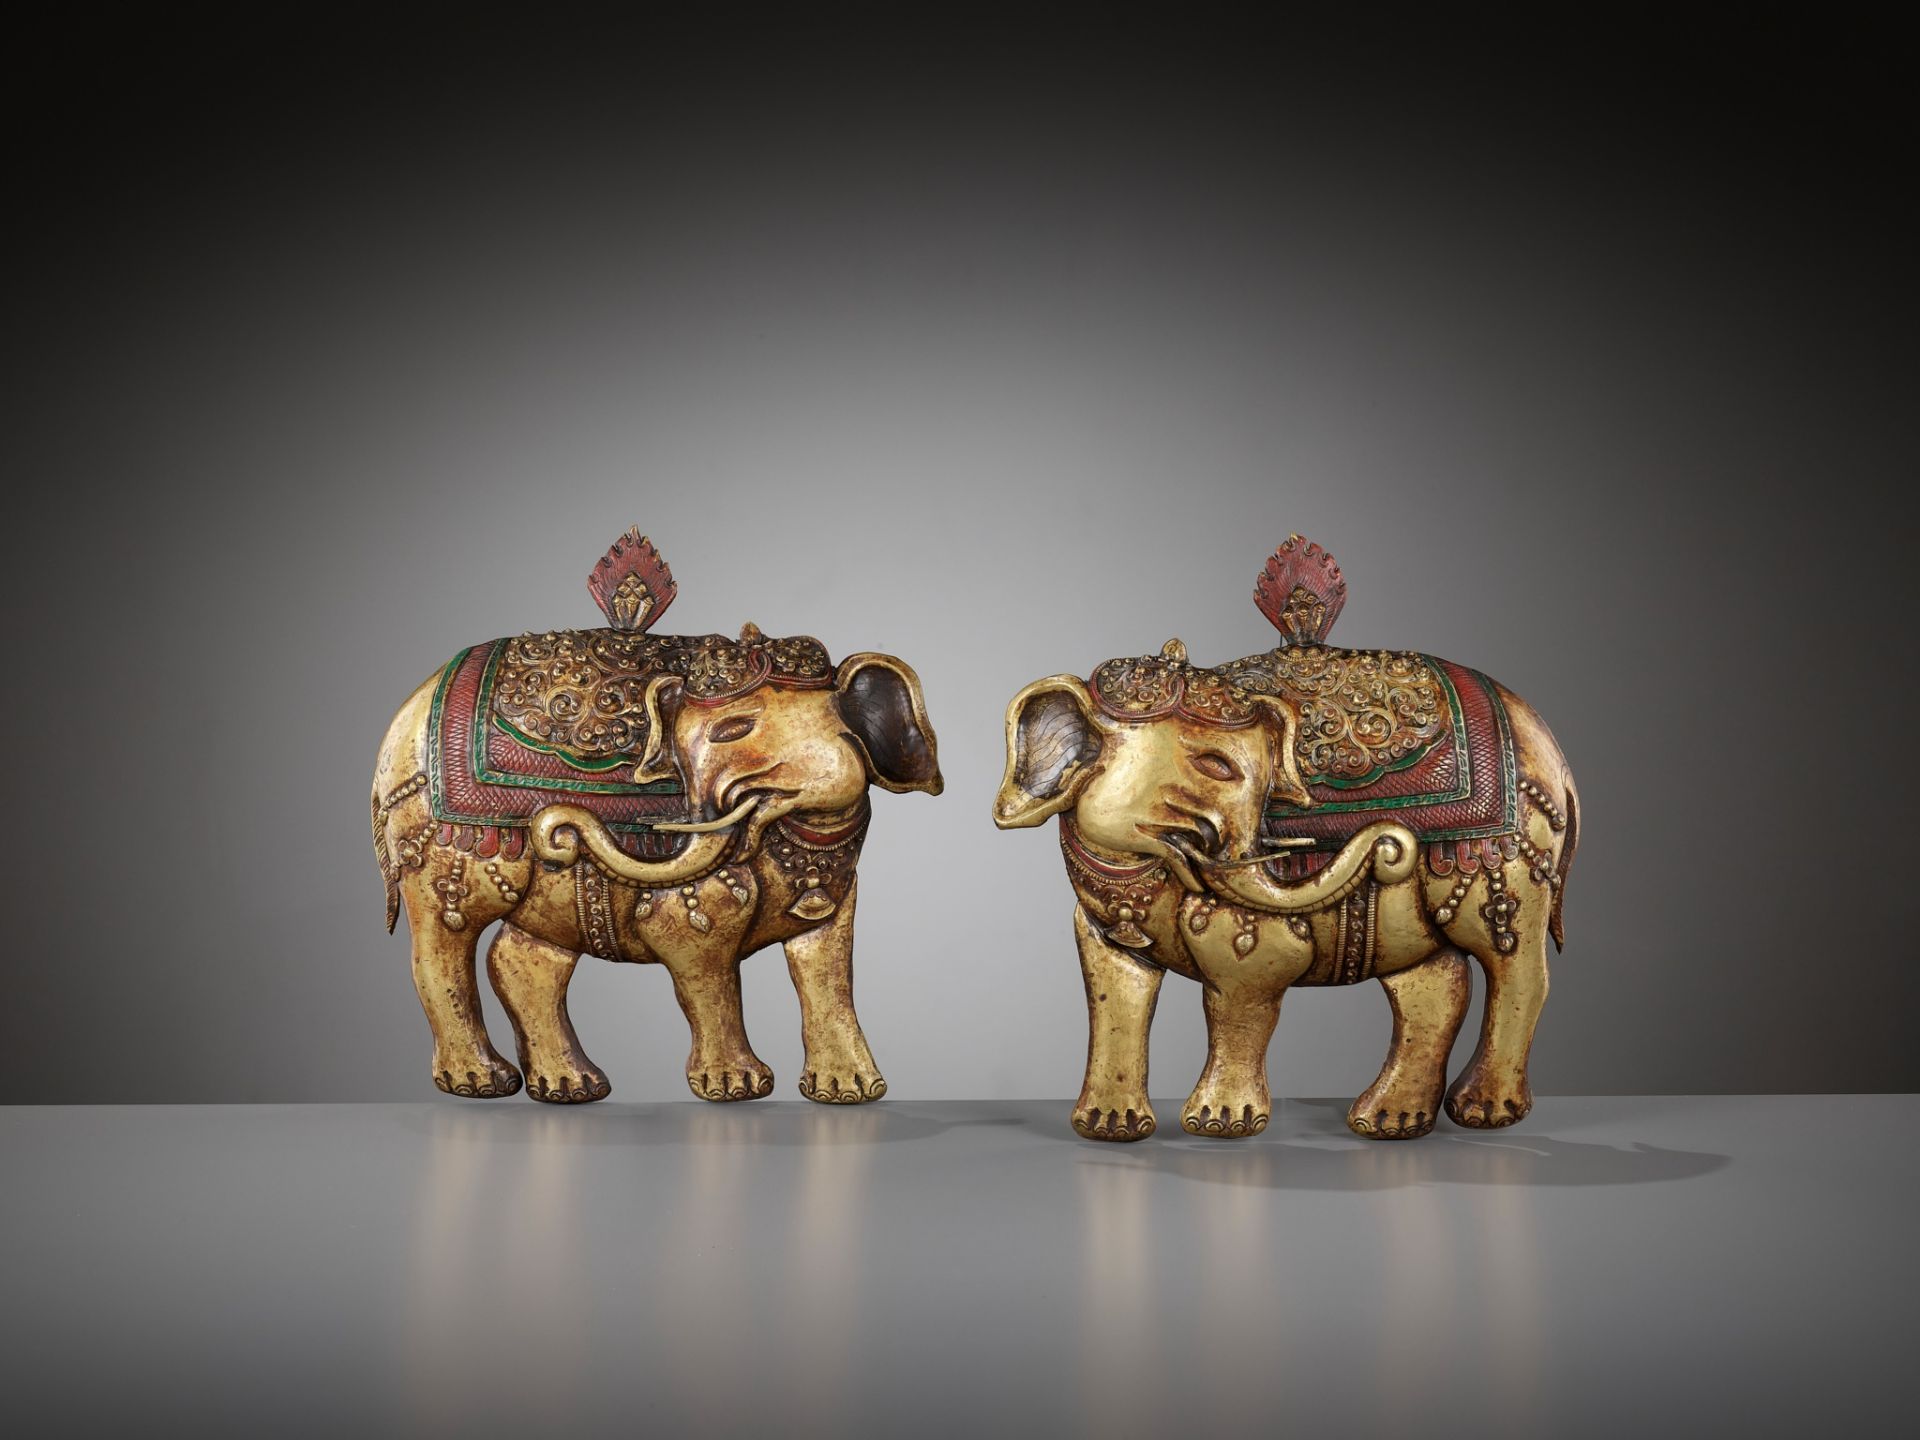 A PAIR OF GILT AND POLYCHROME-DECORATED COPPER REPOUSSE PLAQUES, HASTIRATNA, 17TH-18TH CENTURY - Image 6 of 12